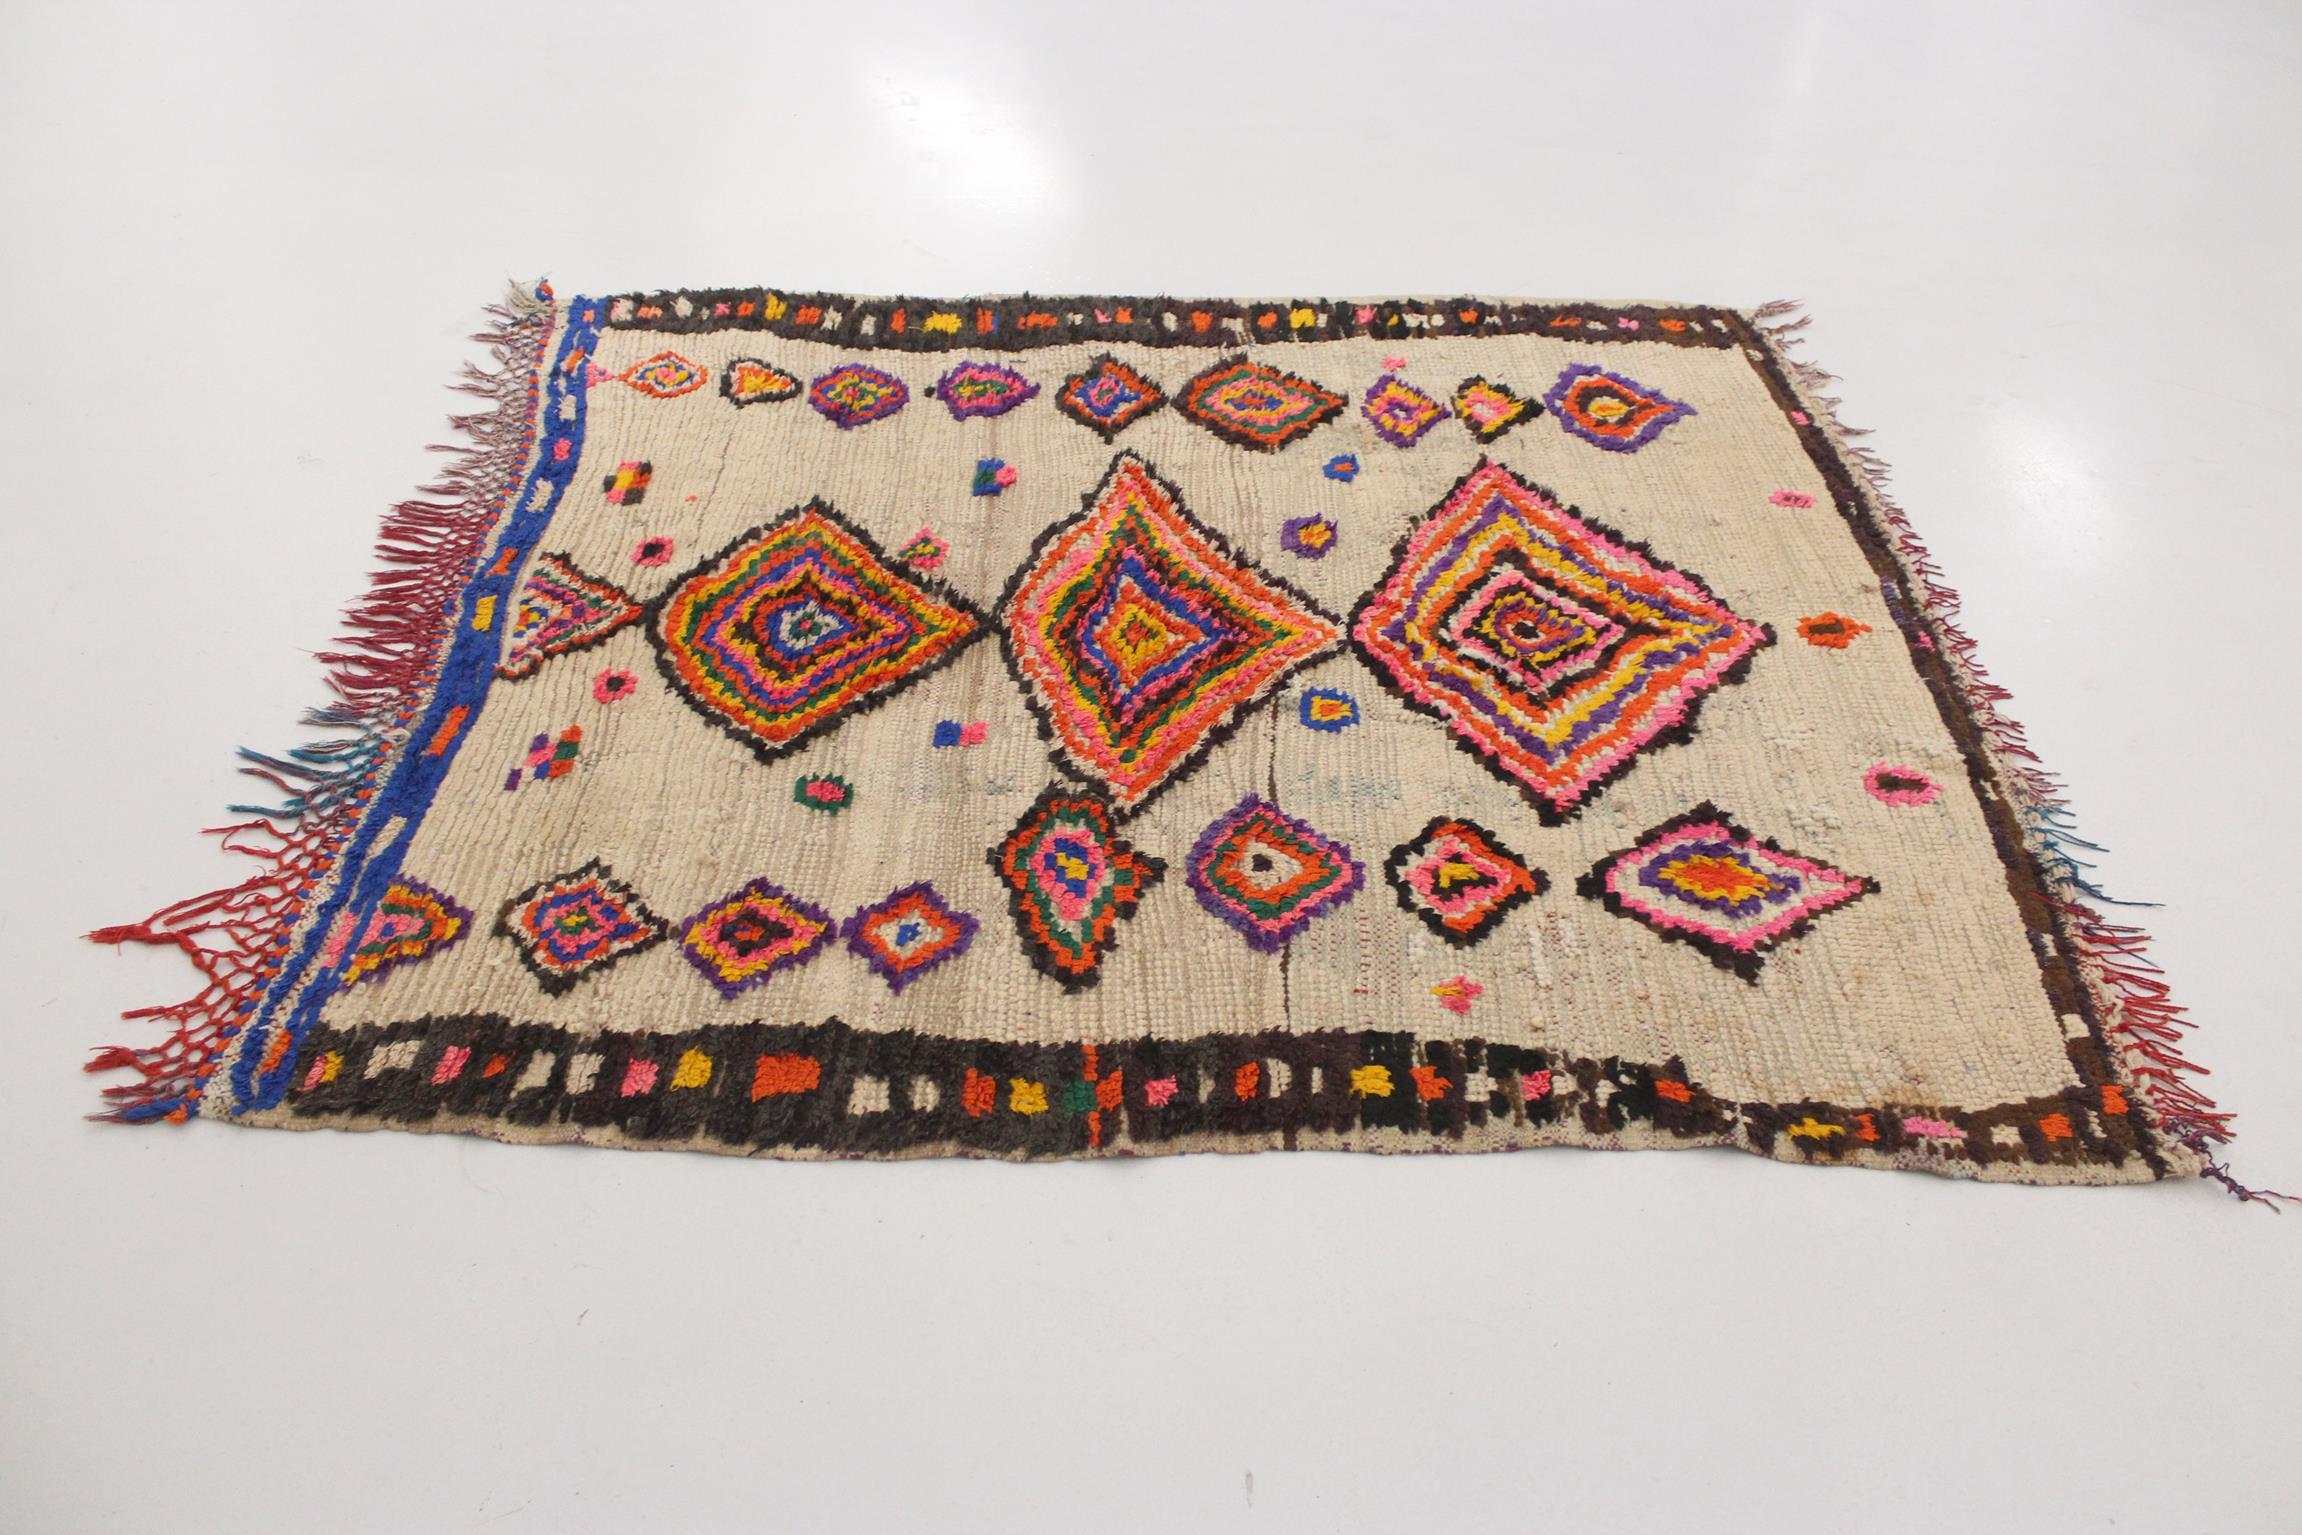 Tribal Vintage Moroccan Azilal rug - Multicolor - 4.7x5.4feet / 144x164cm For Sale